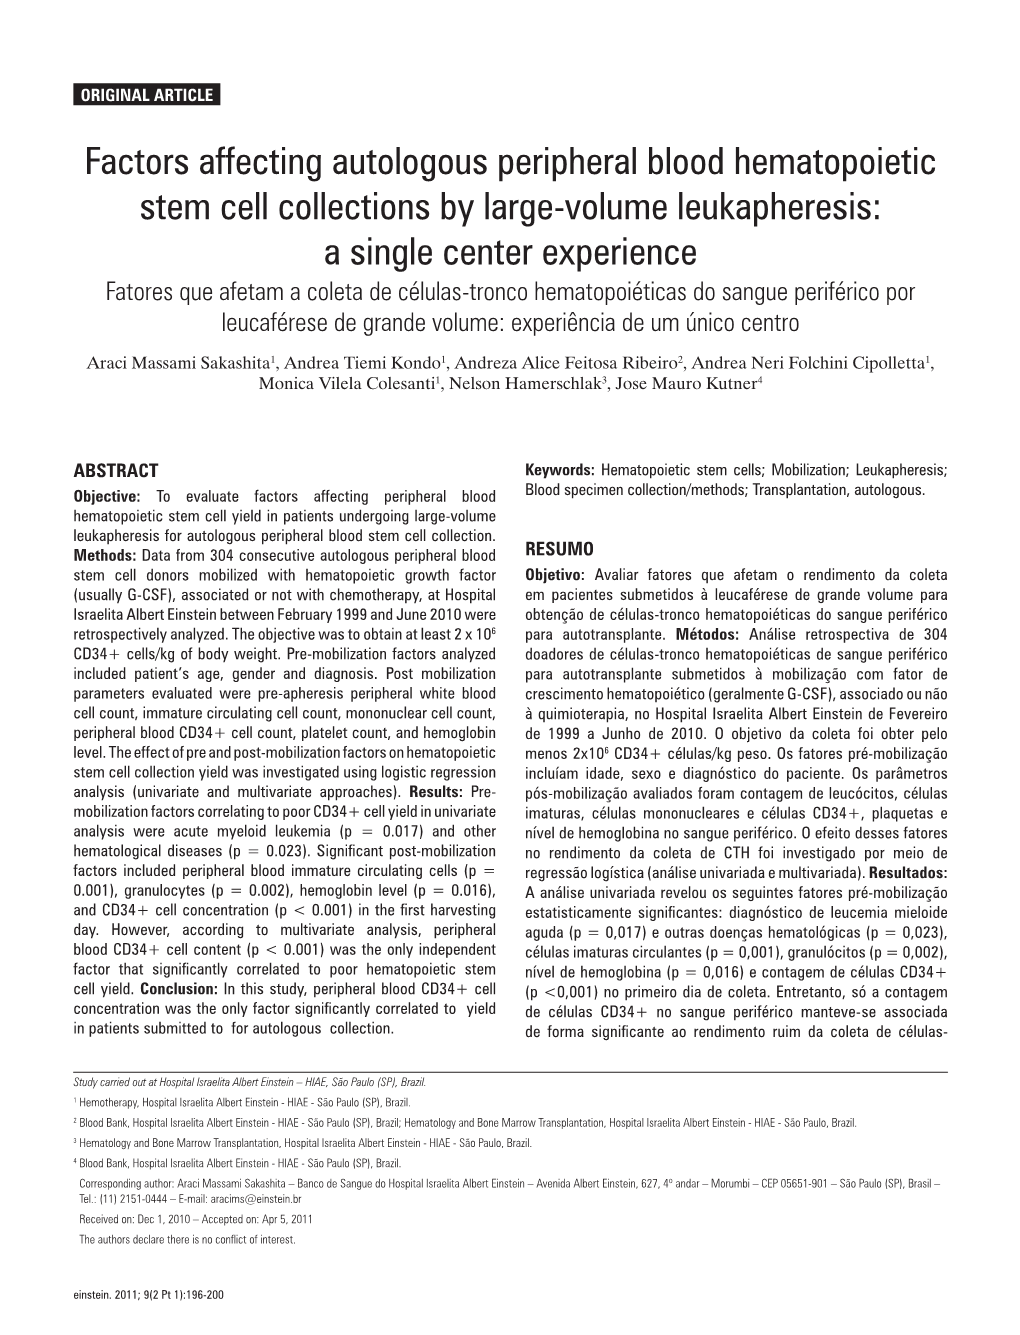 Factors Affecting Autologous Peripheral Blood Hematopoietic Stem Cell Collections by Large-Volume Leukapheresis